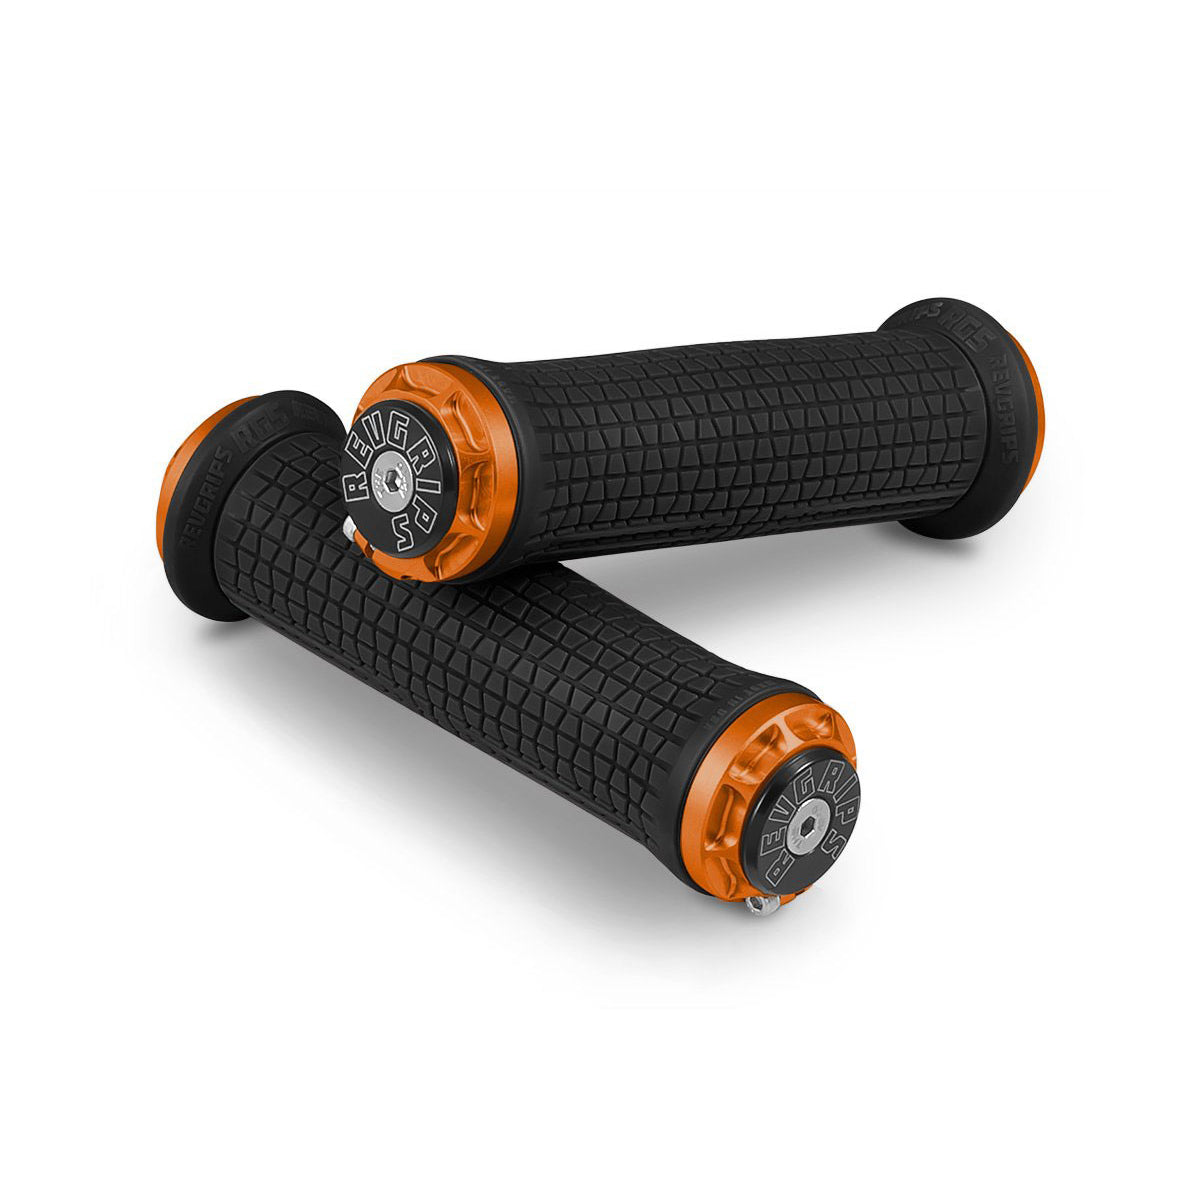 RevGrips Pro Series Grips - Black With Orange Clamps - RG4